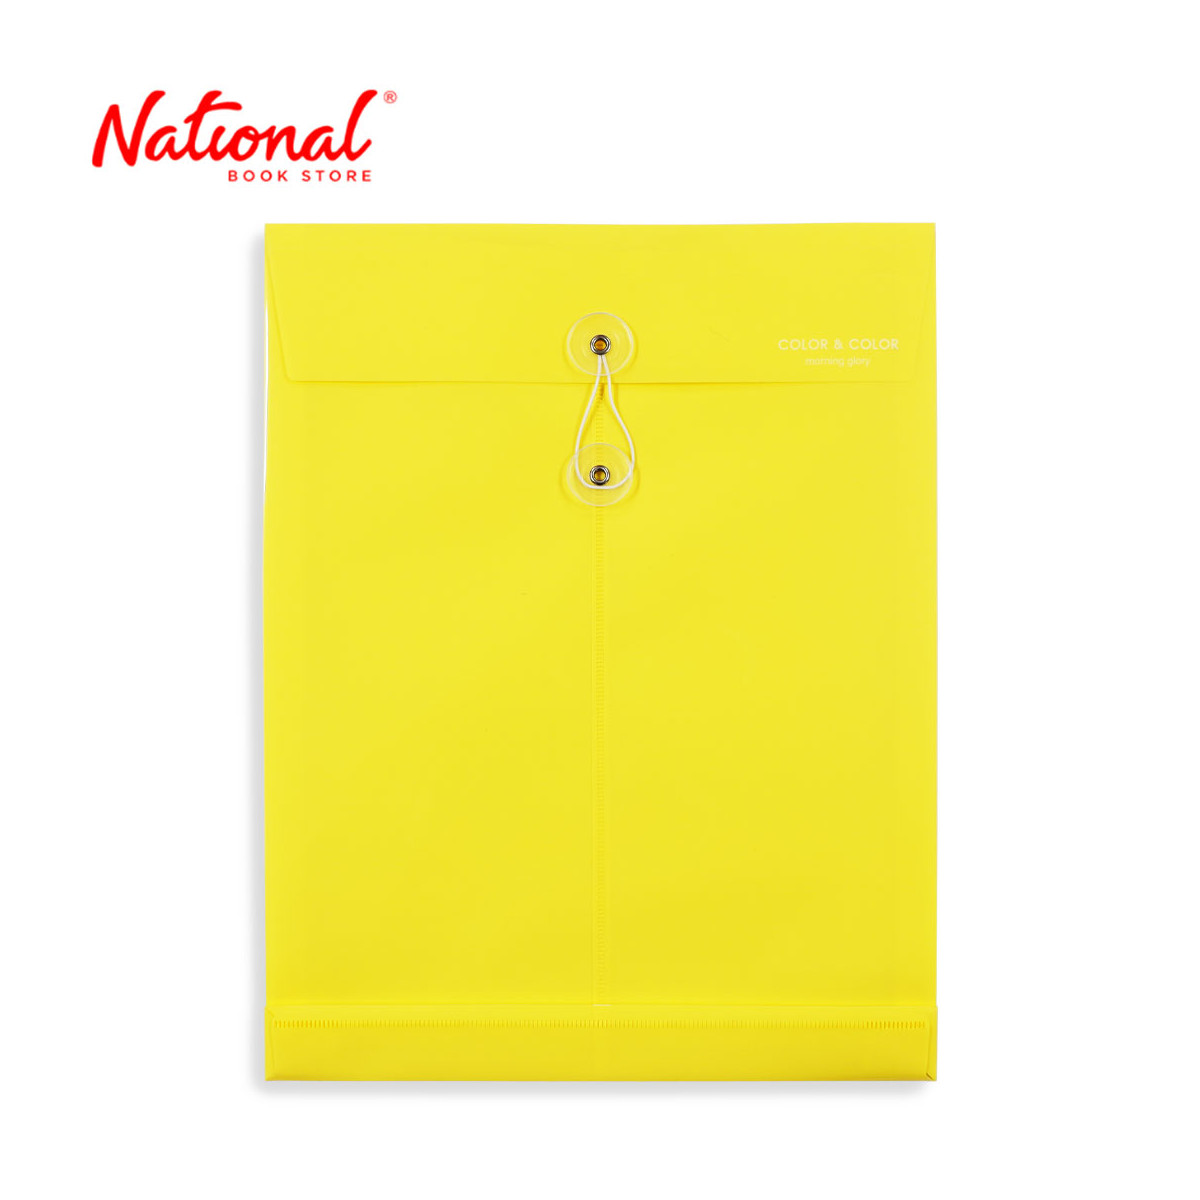 Morning Glory Plastic Envelope 51721-86920 Yellow A4 Expanding String Lock Vertical